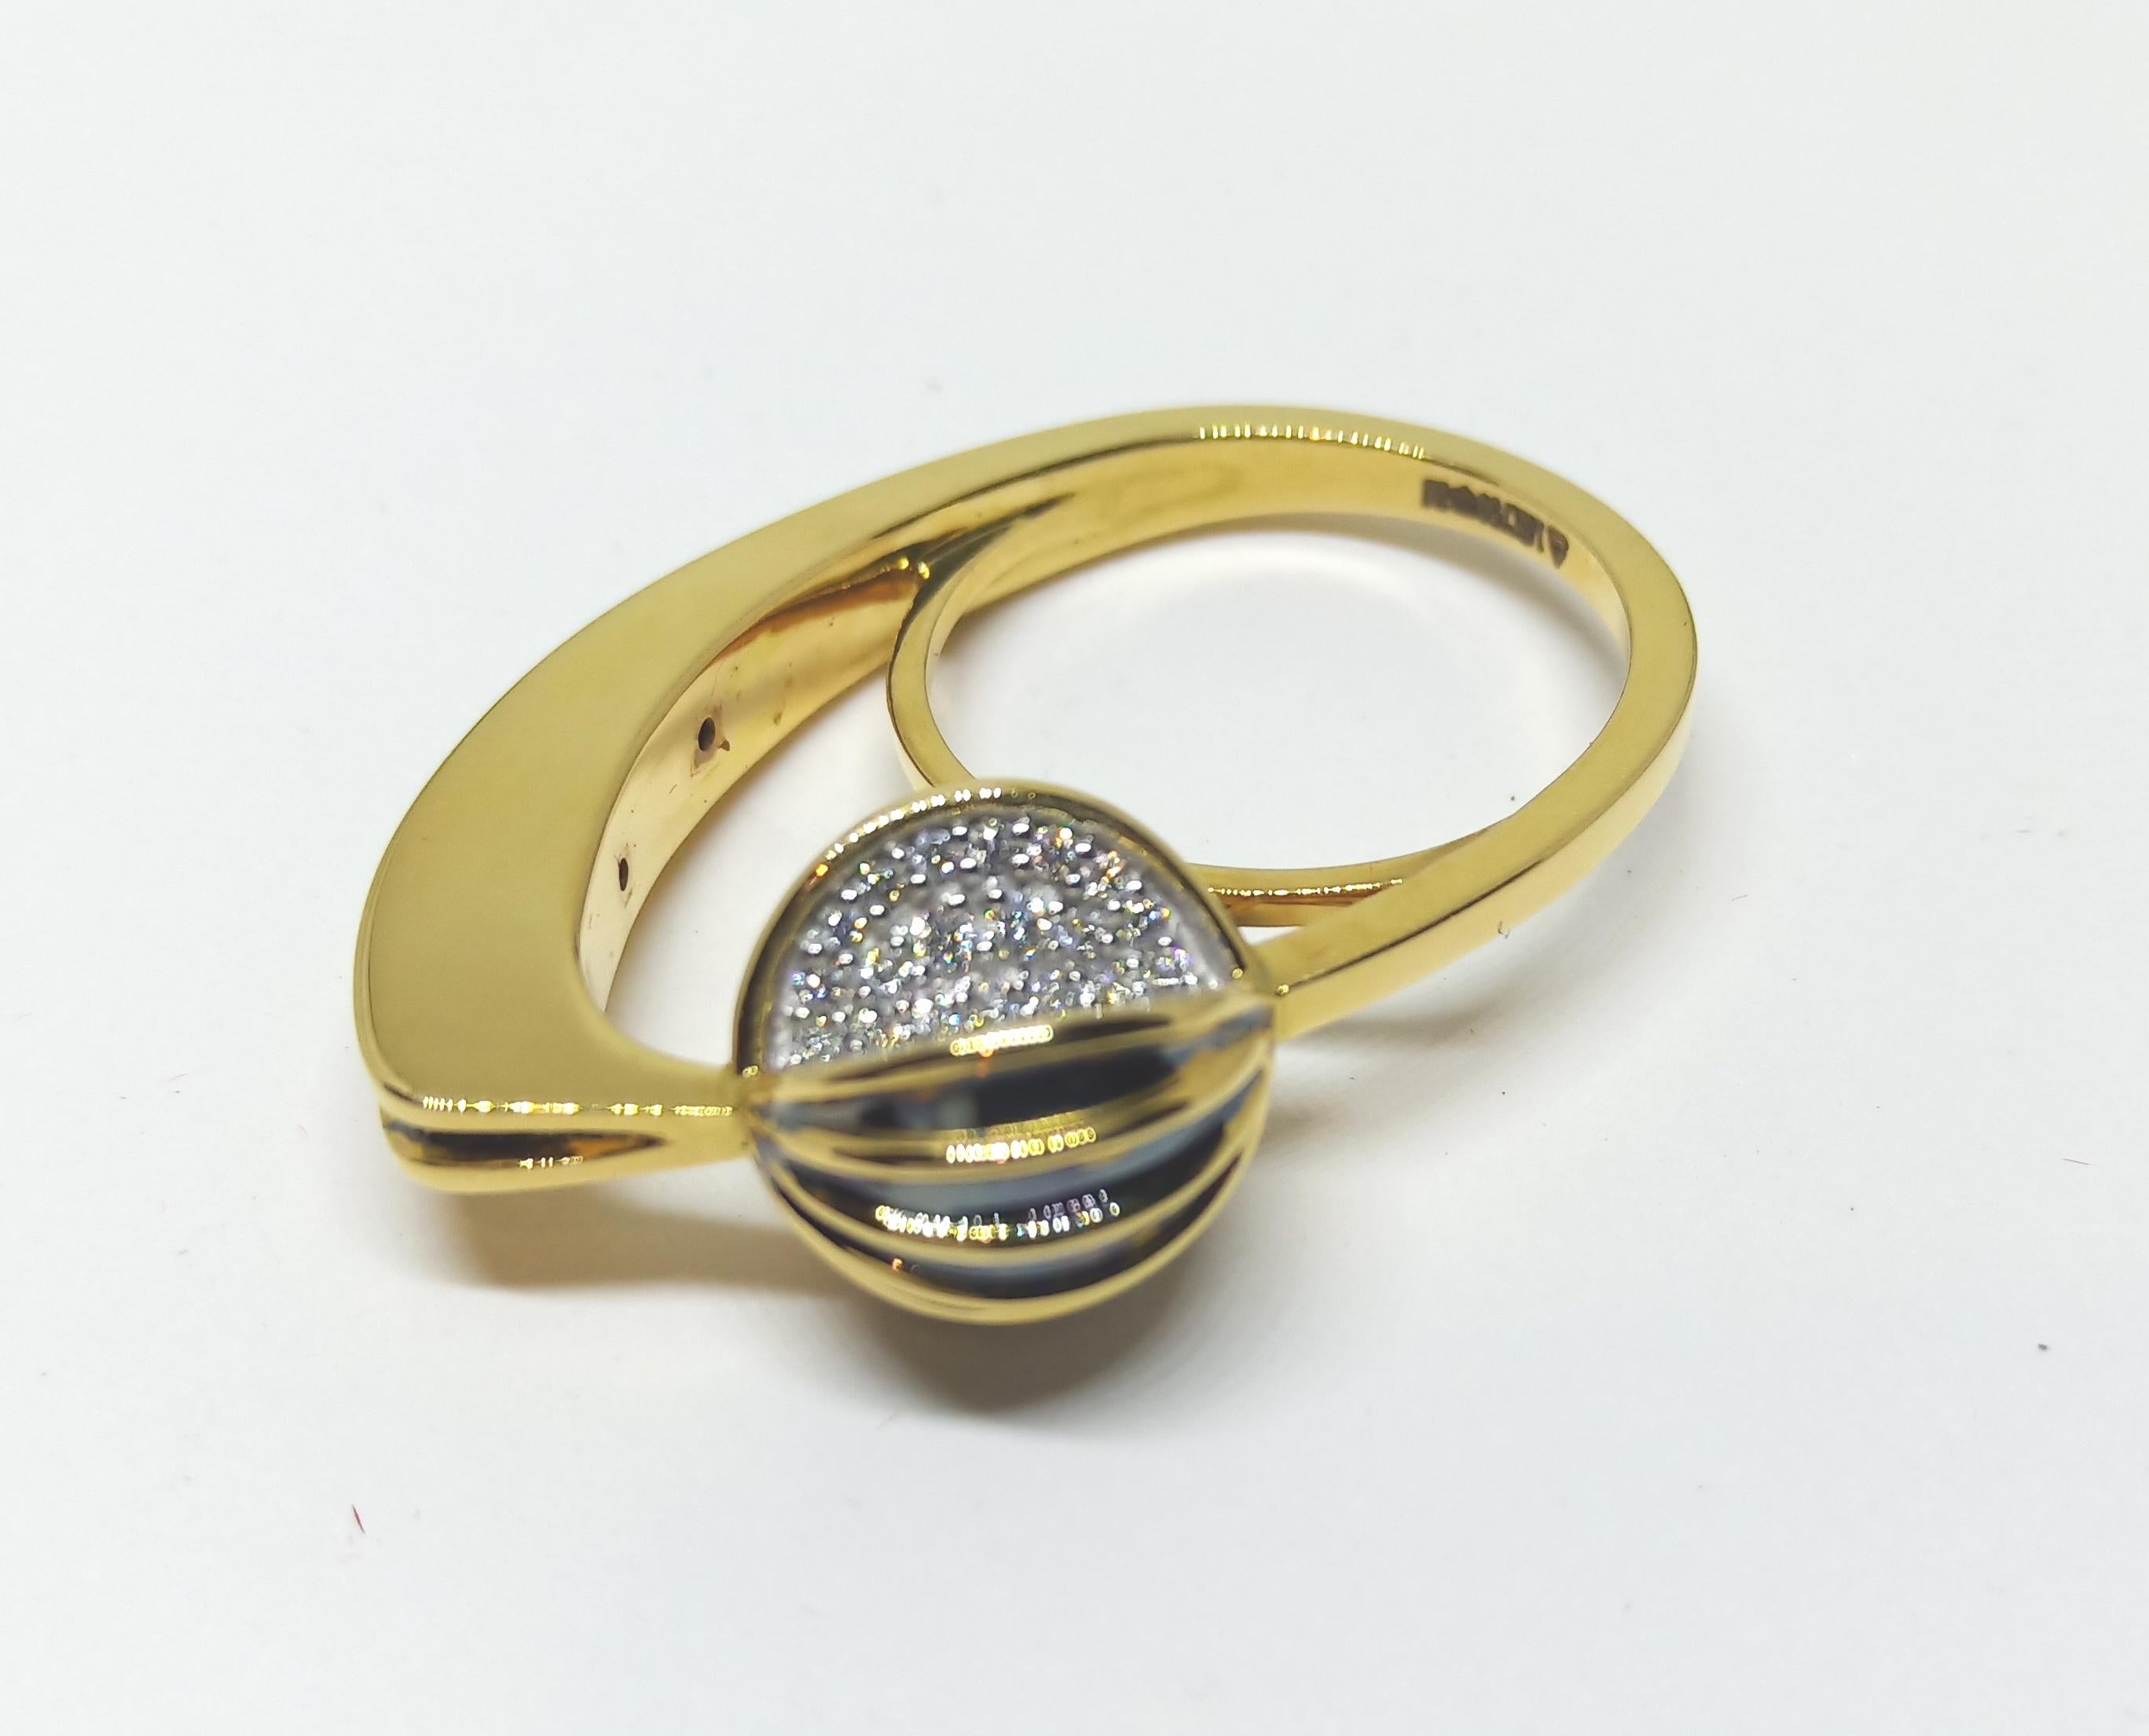 This One Of A Kind Ring features Round White Diamonds in Yellow Gold with accents of Black Rhodium. Rohit infuses unique design elements to create this special work. 
- Round White Diamonds (Total Carat Weight: 0.21 carats)
-18 Karat Yellow Gold (